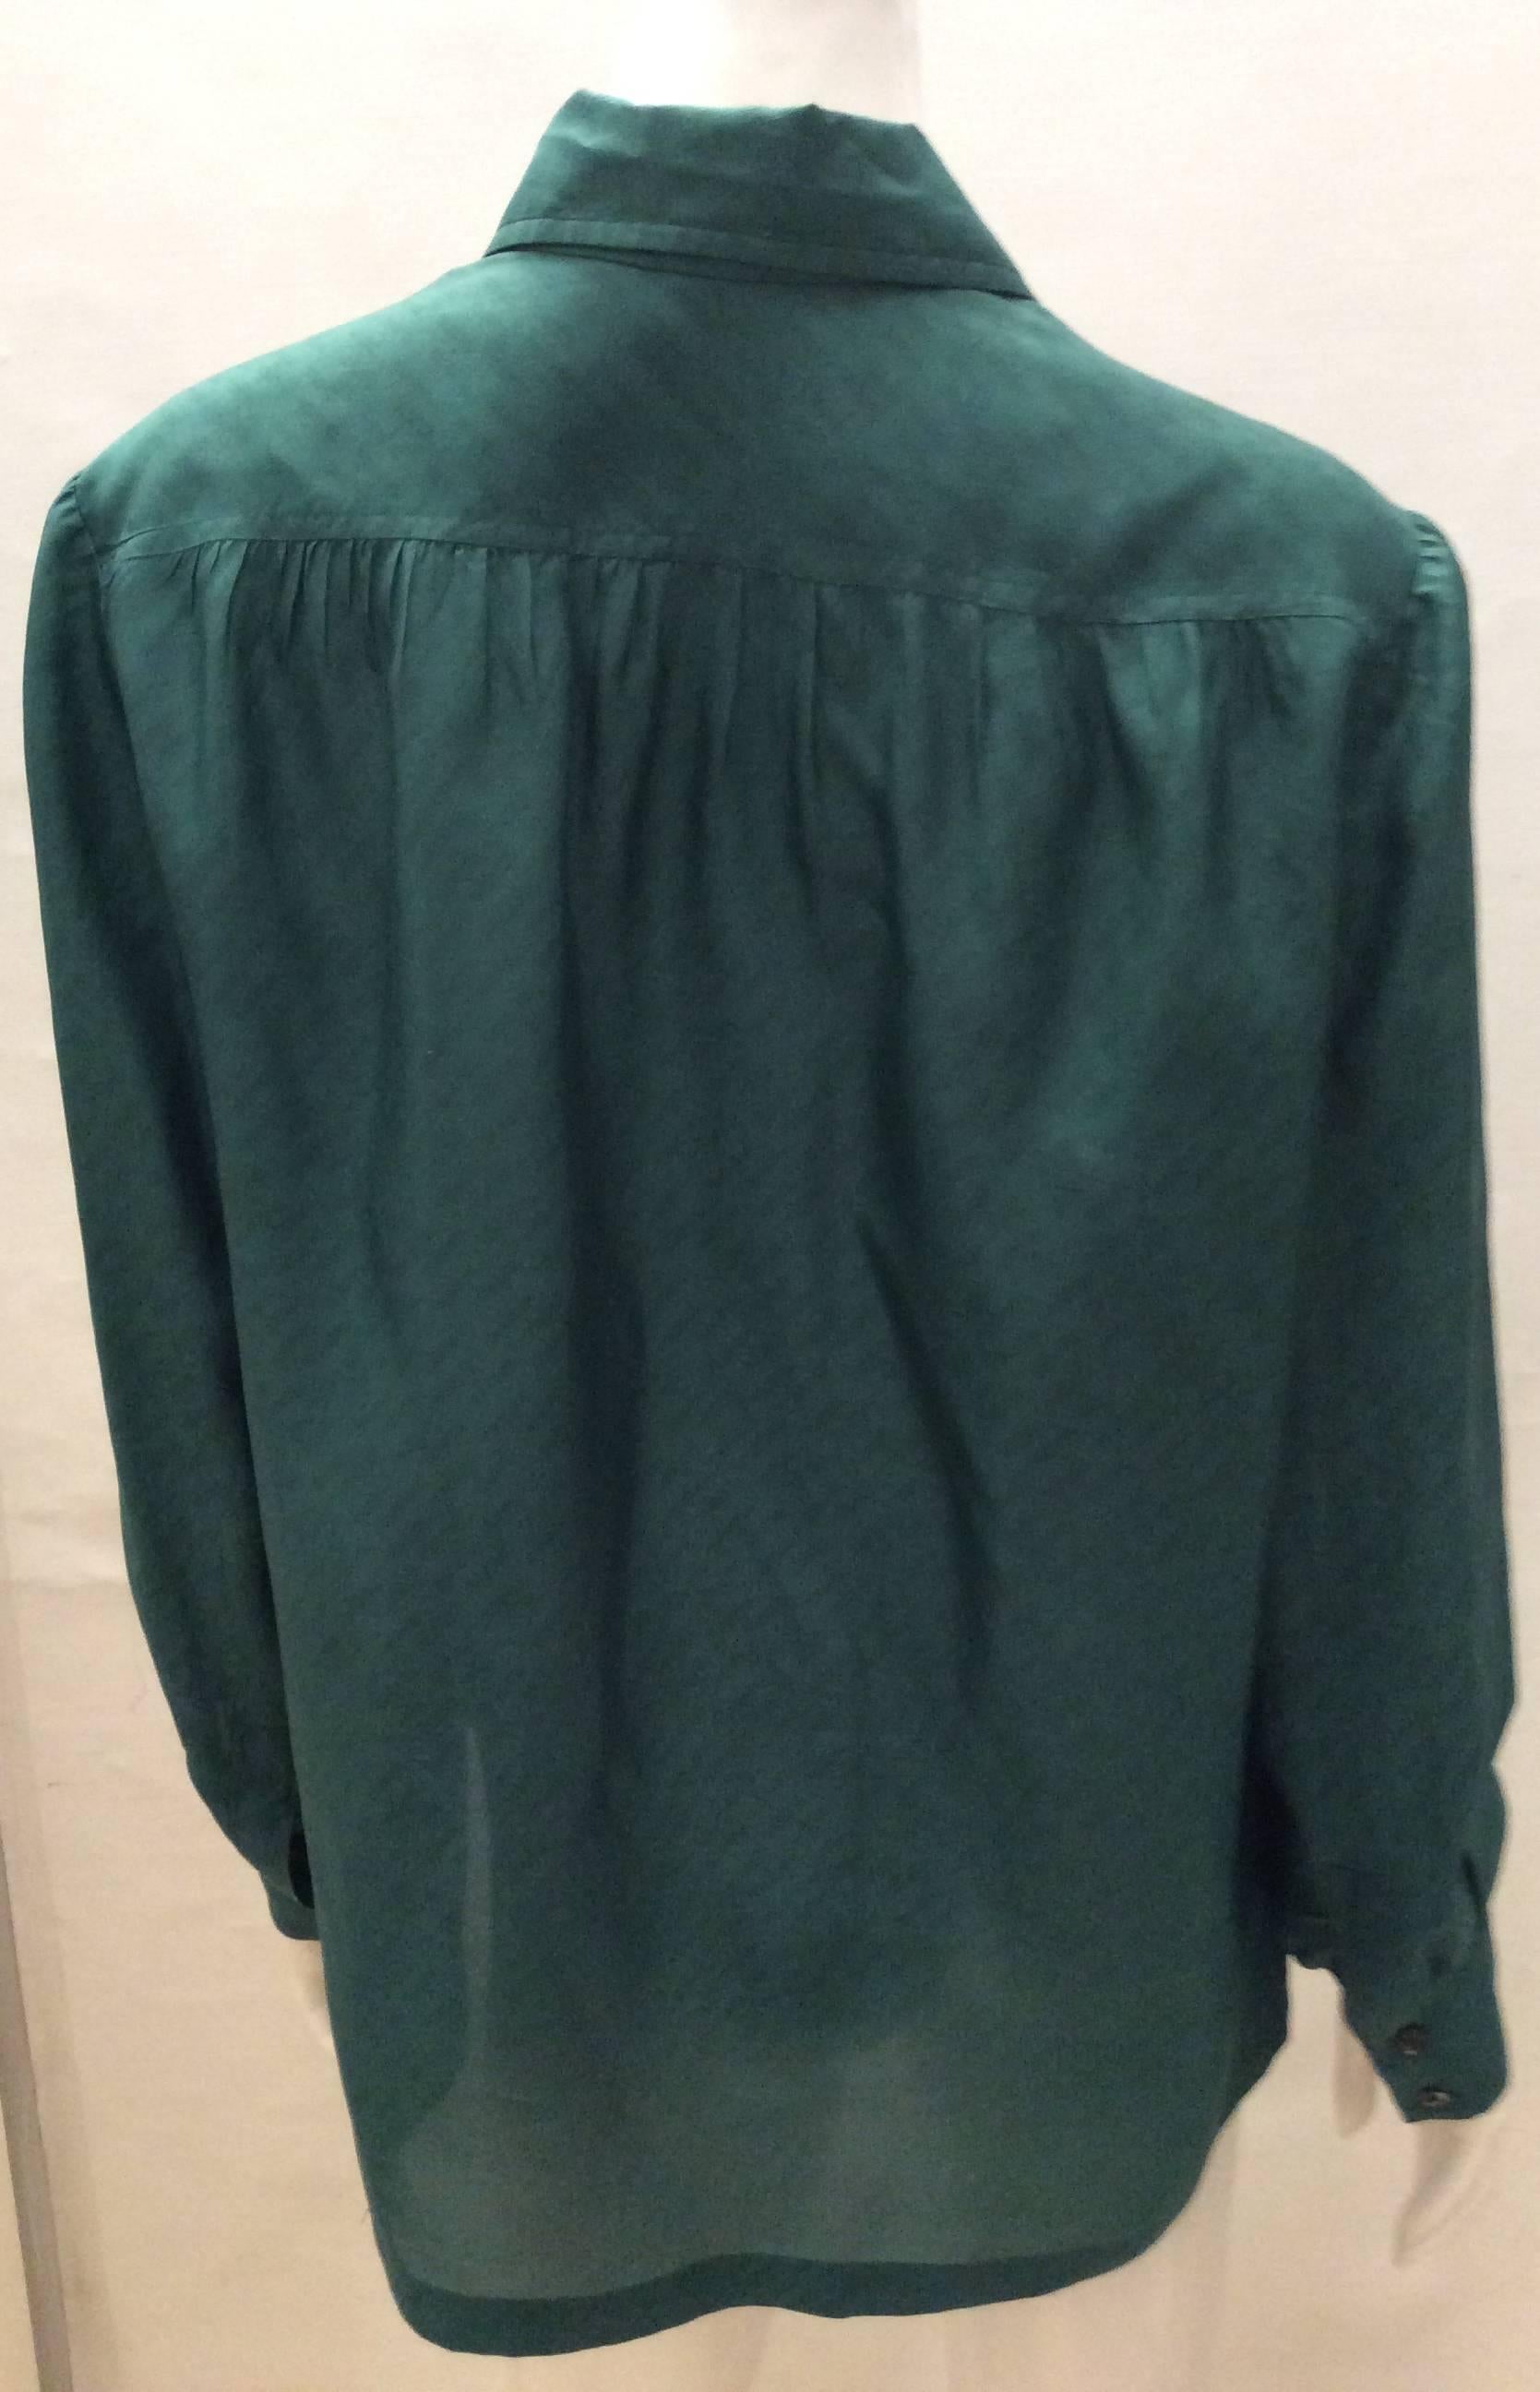 This Hermes teal blouse is a magnificent silk blouse in size 48. It can fit a variety of sizings depending upon the desired fitting. It can fit smaller if the desired fitting is a looser more flowing fitting or a larger sizing if a more form fitting